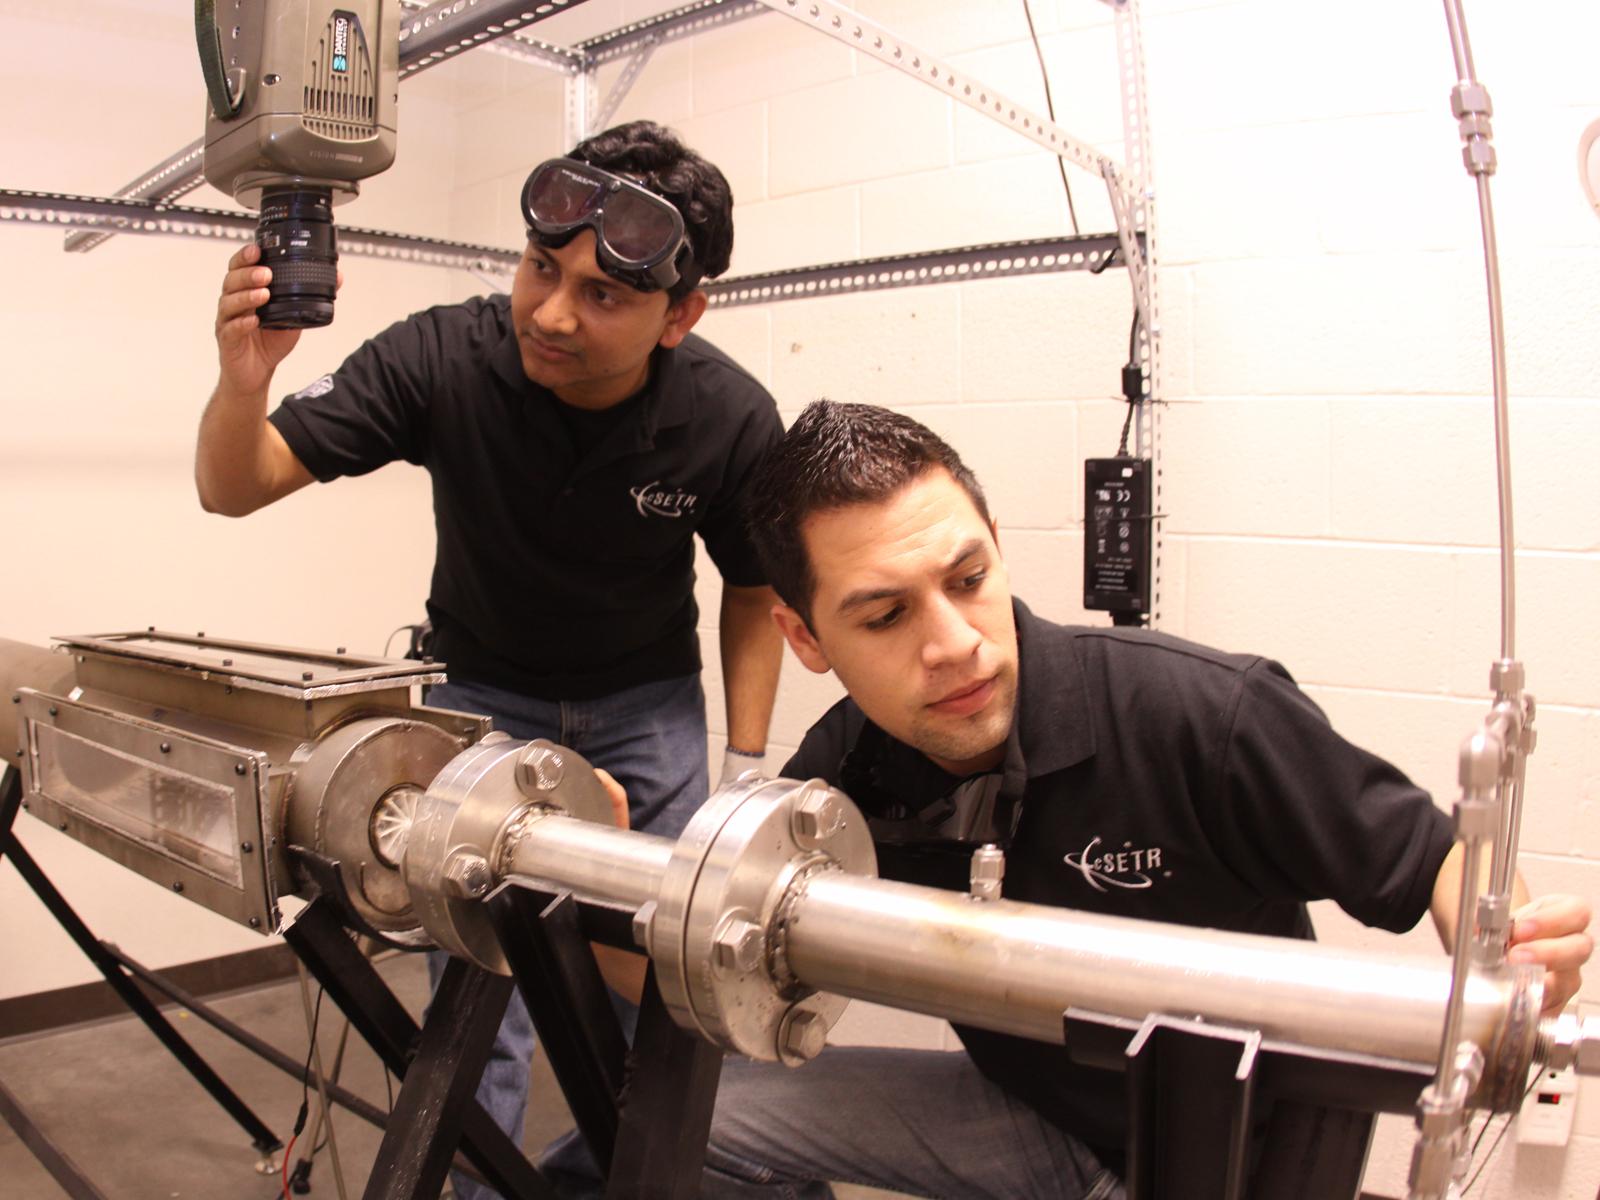 Research assistants in the Center for Space Exploration Technology Research setup a laboratory scale turbine combustion rig